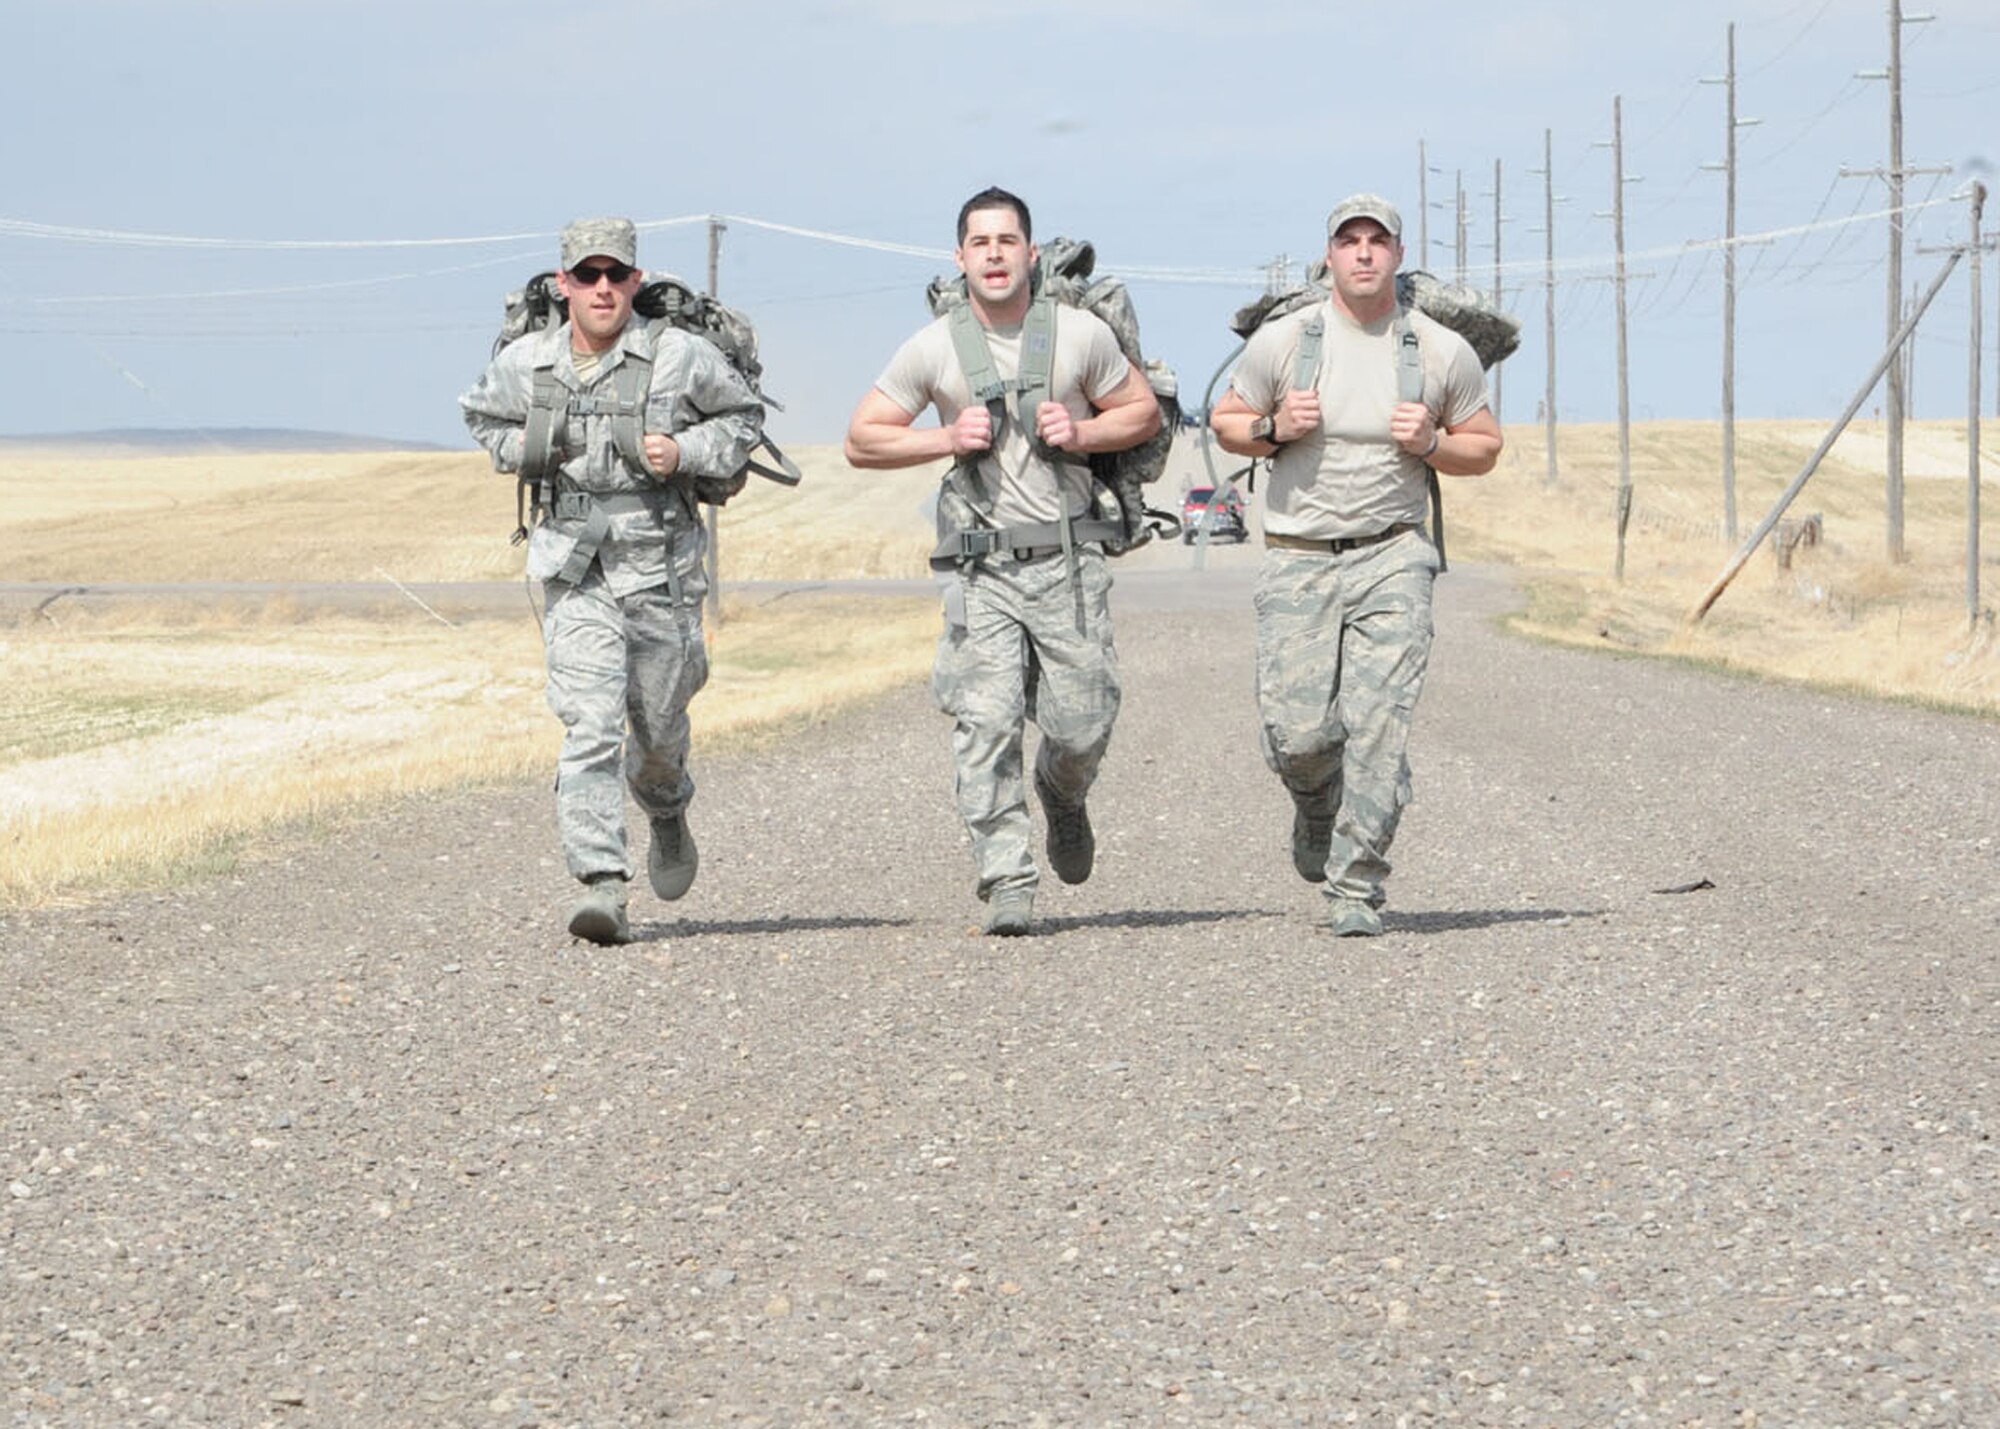 (From left) Senior Airman Trey Stone, 741st Missile Security Forces Squadron member, Senior Airman Jordan Cunningham, 341st Civil Engineer Squadron pavement and construction equipment apprentice, and Staff Sgt. Ryan Krastins, 341st Security Forces Group tactical response force member, push through pain during the last stretch of an 8.3-mile ruck march held April 3. Spearheaded by the 341st SFG, the all-day event including a CrossFit workout, remembrance ceremony and 8.3-mile ruck march was held to honor fallen Staff Sgt. Travis Griffin five years after he paid the ultimate sacrifice in combat. (U.S. Air Force photo/Airman 1st Class Katrina Heikkinen)